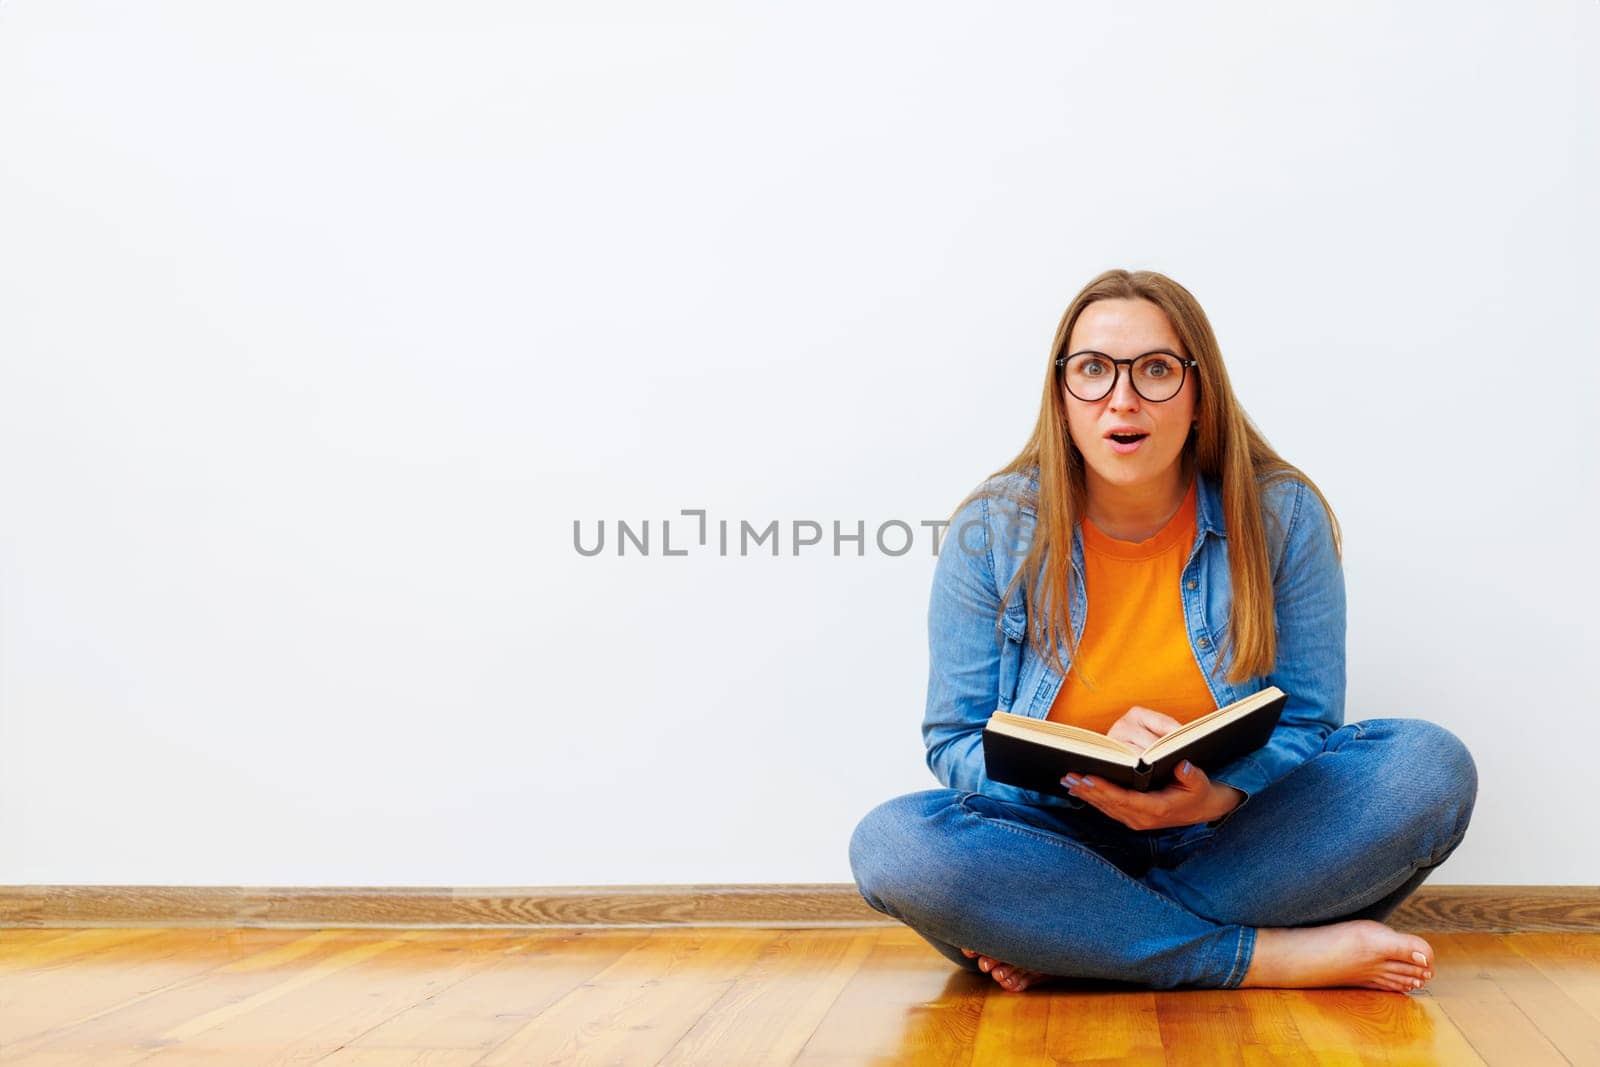 Surprised woman with glasses sits on the floor against white wall holding book by andreyz